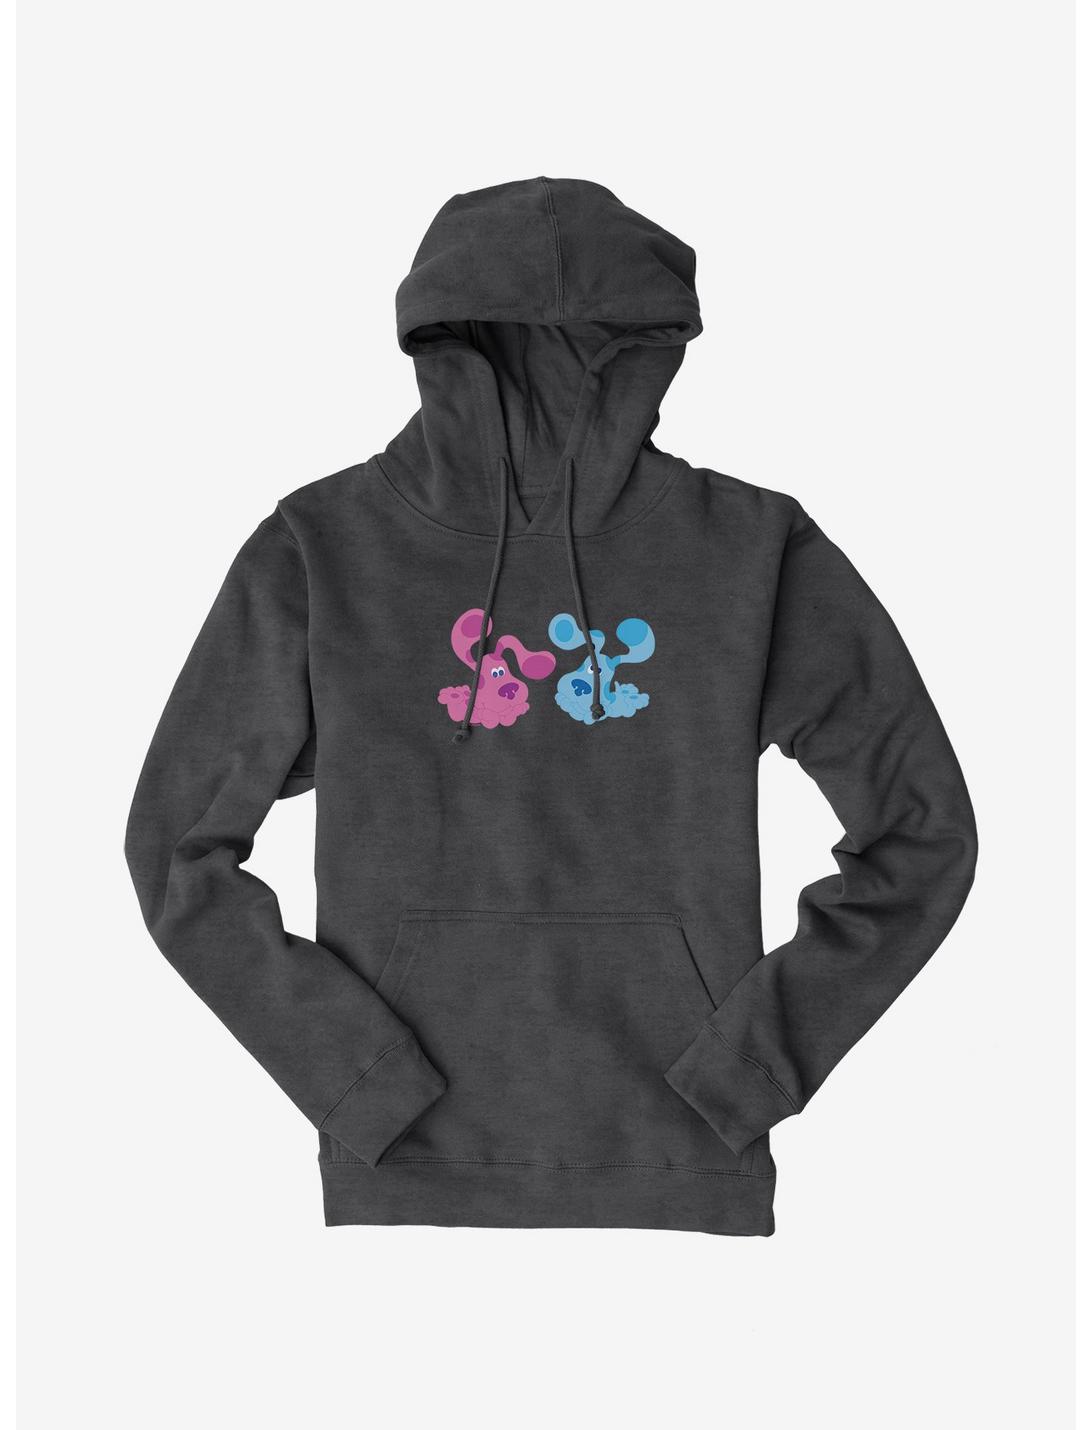 Blue's Clues Playful Magenta And Blue Hoodie, CHARCOAL HEATHER, hi-res